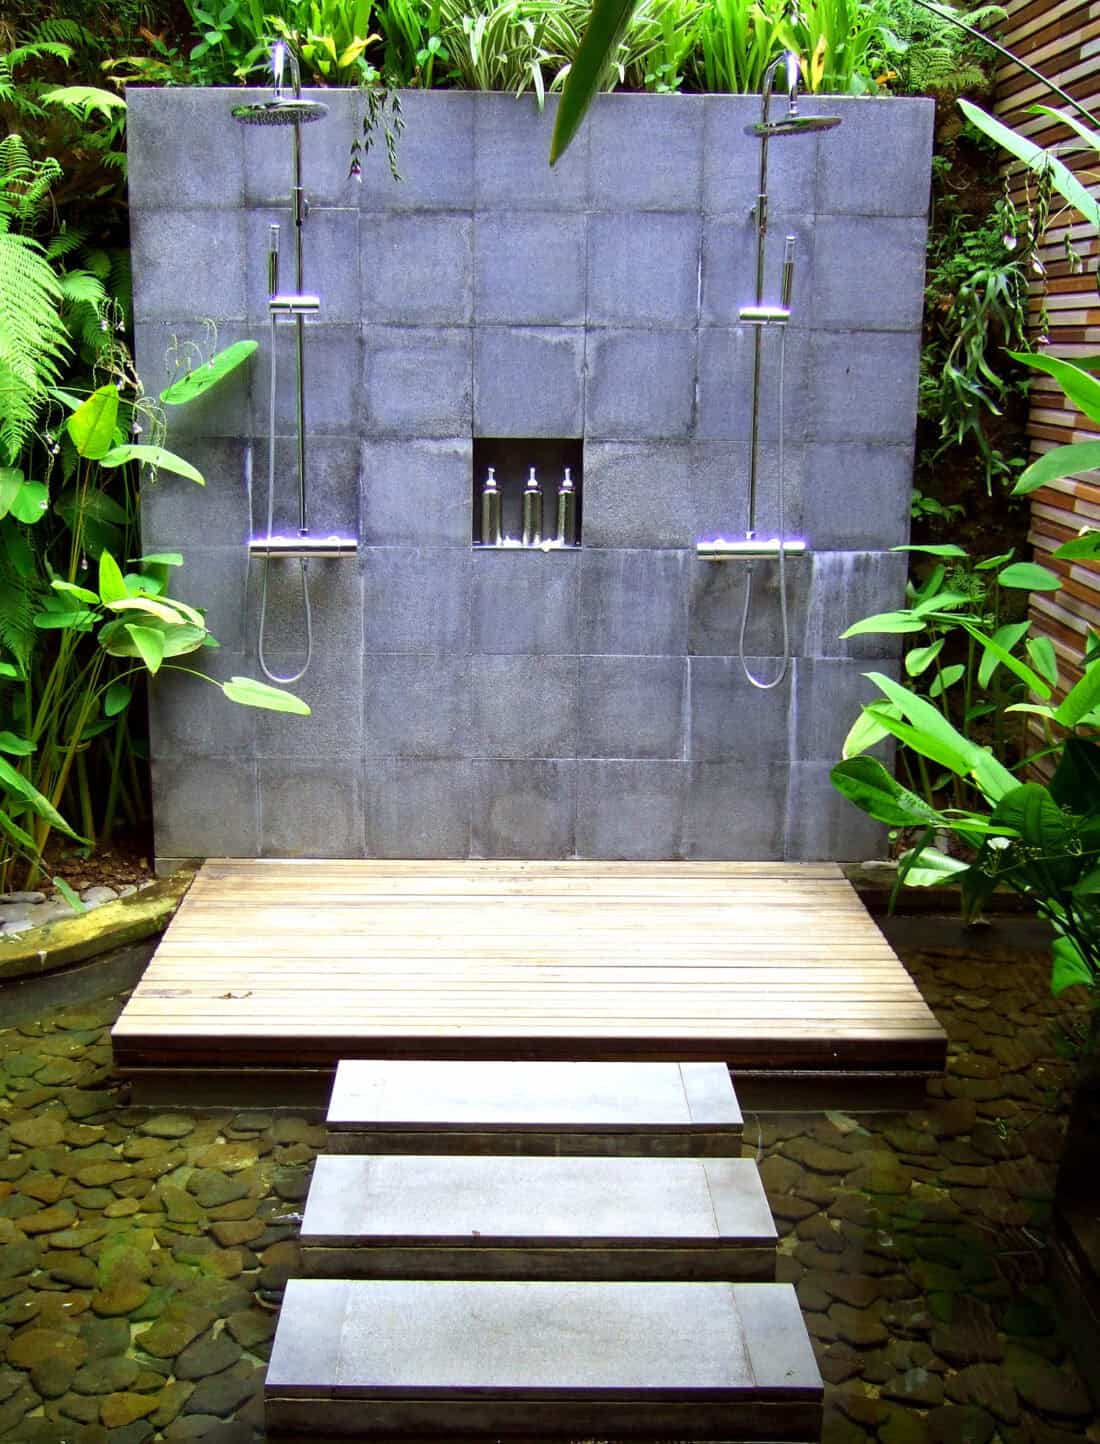 Outdoor shower with dual heads on a gray concrete wall, a wooden platform in front, and stepping stones across the water, nestled amid lush greenery.